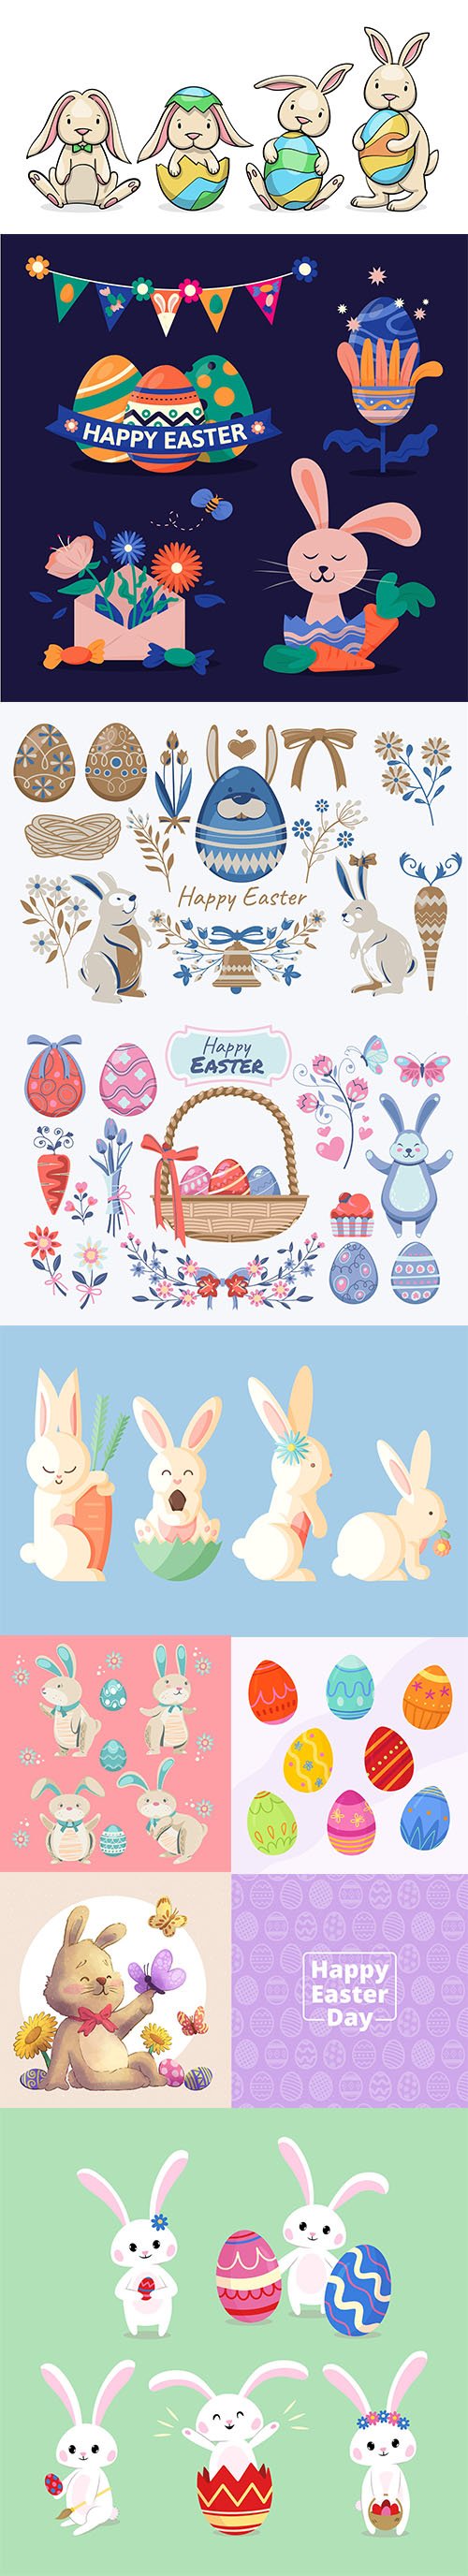 Easter bunny and other easter elements vector collection